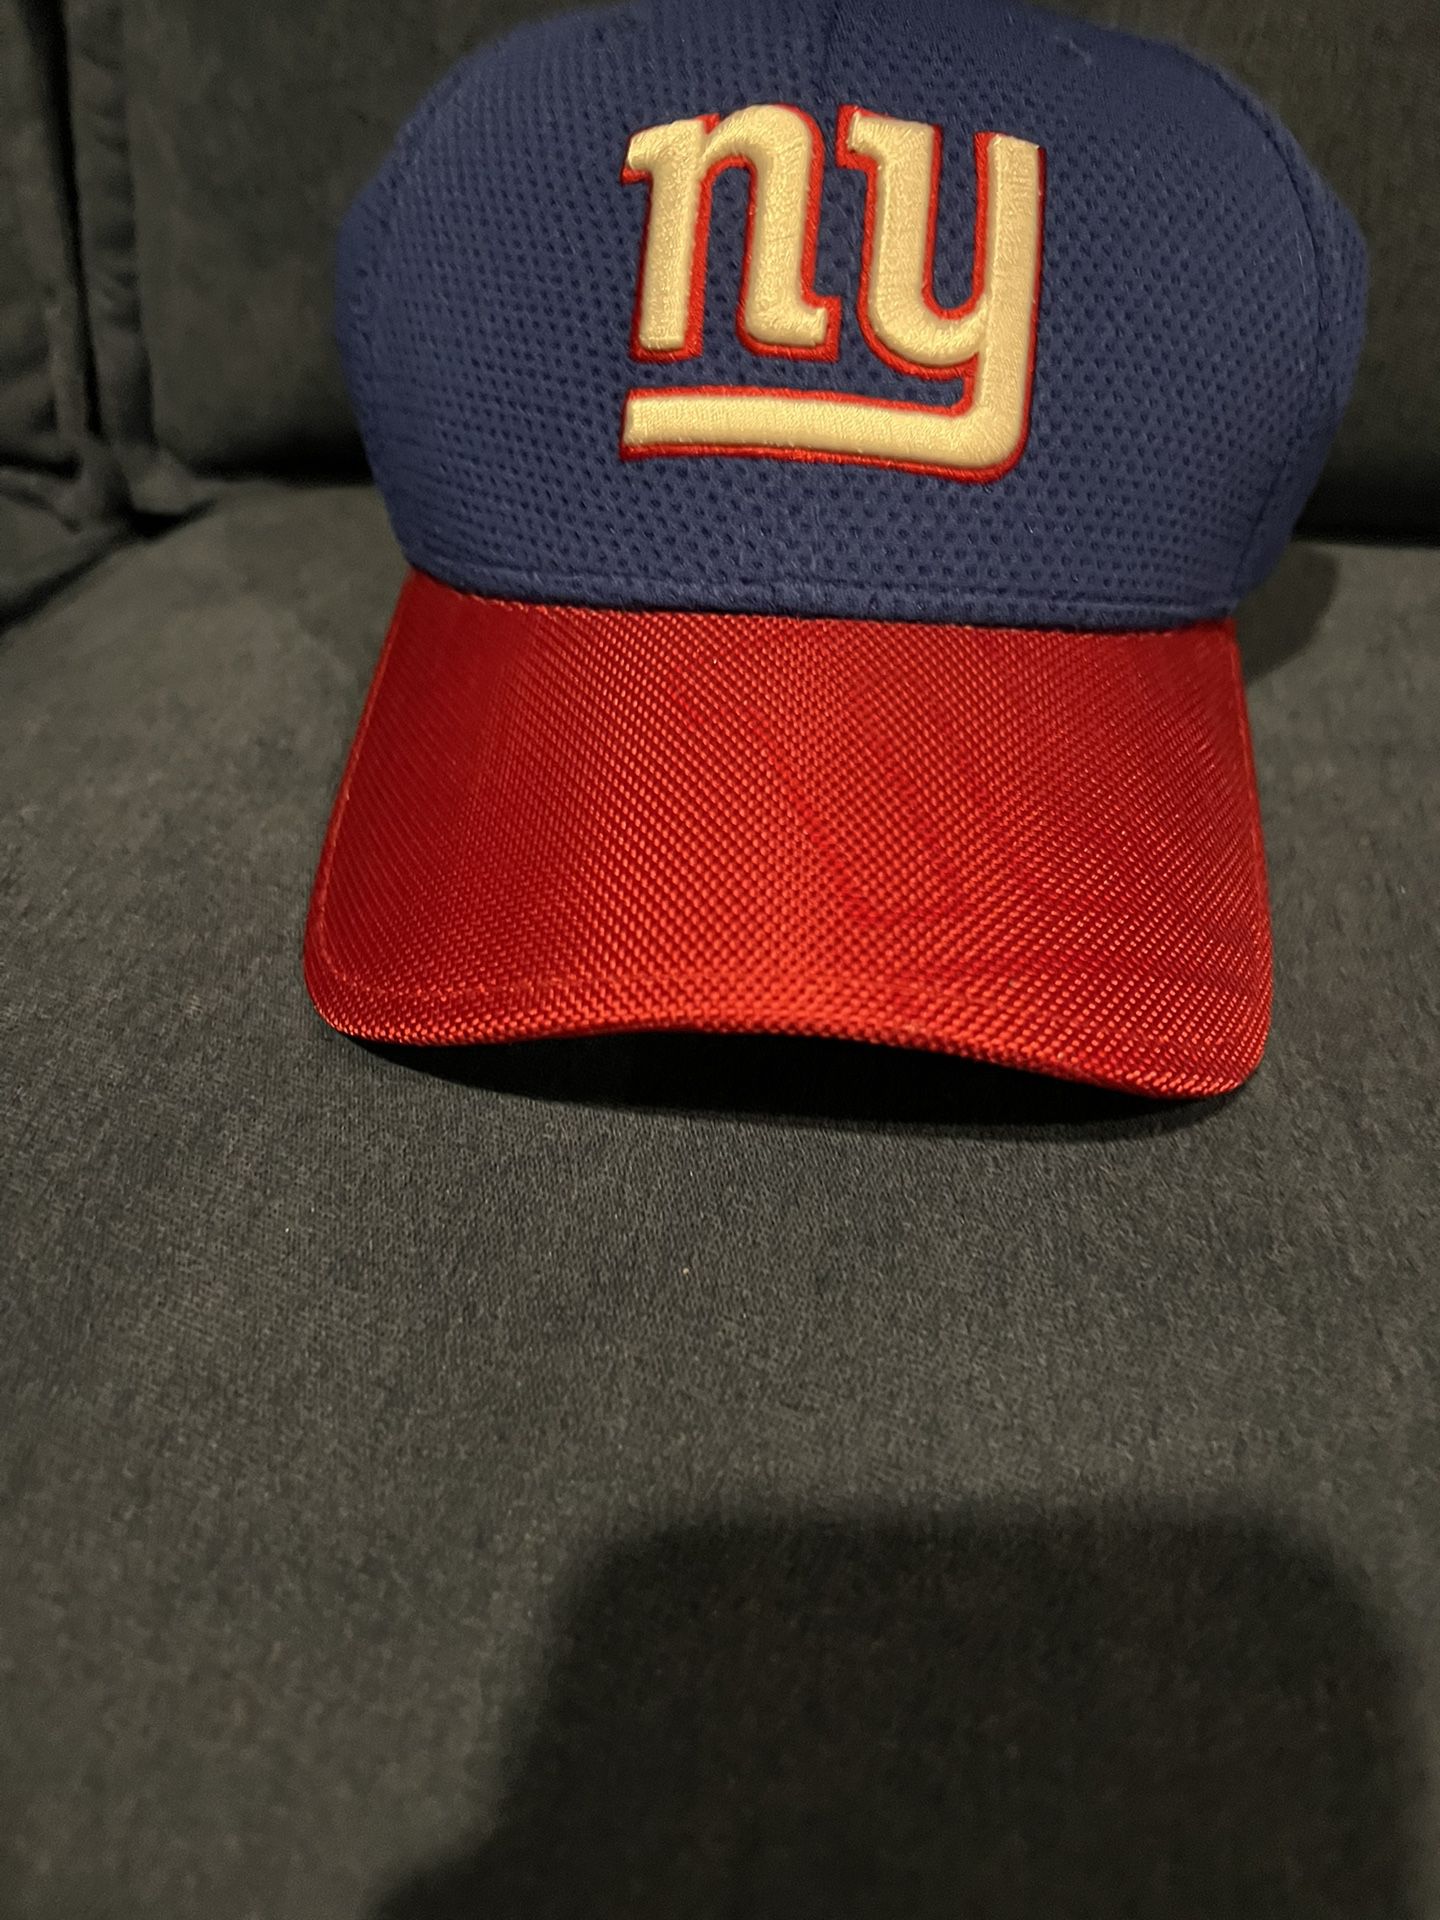 New York Giants New With Tags Hat